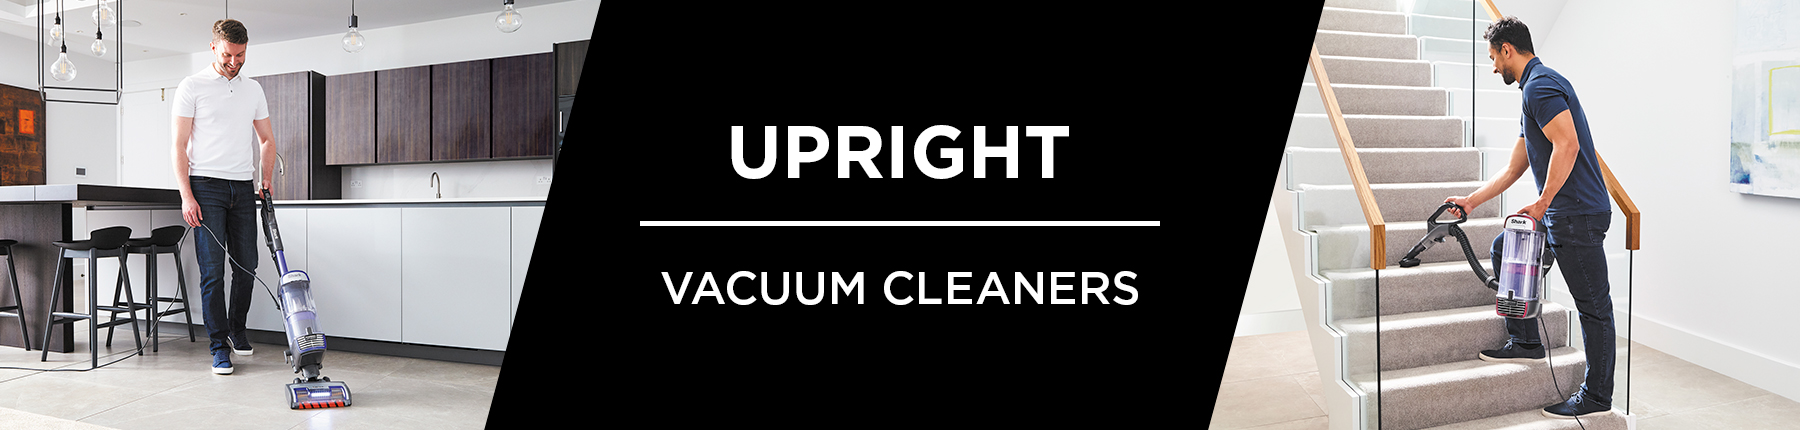 Banner Upright Vacuum Cleaners